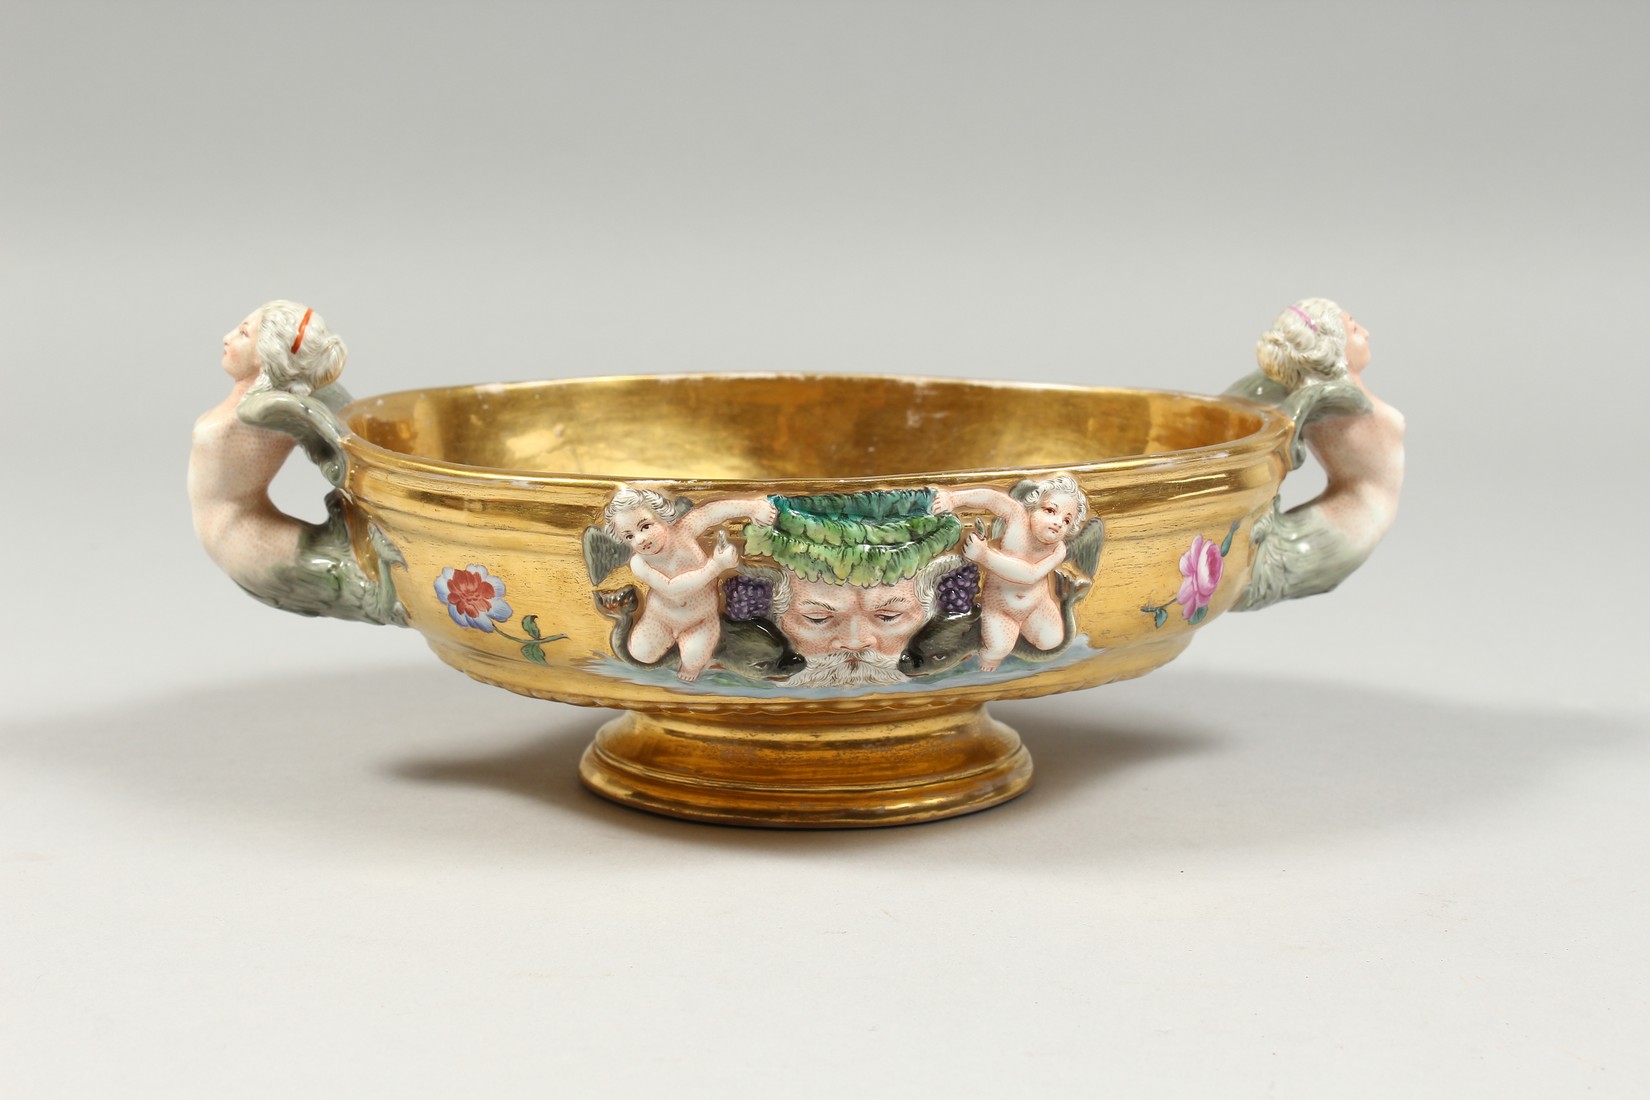 A GOOD BERLIN GILT GROUND OVAL BOWL with mermaid handles, masks and flowers. 8.5ins long - Image 4 of 8